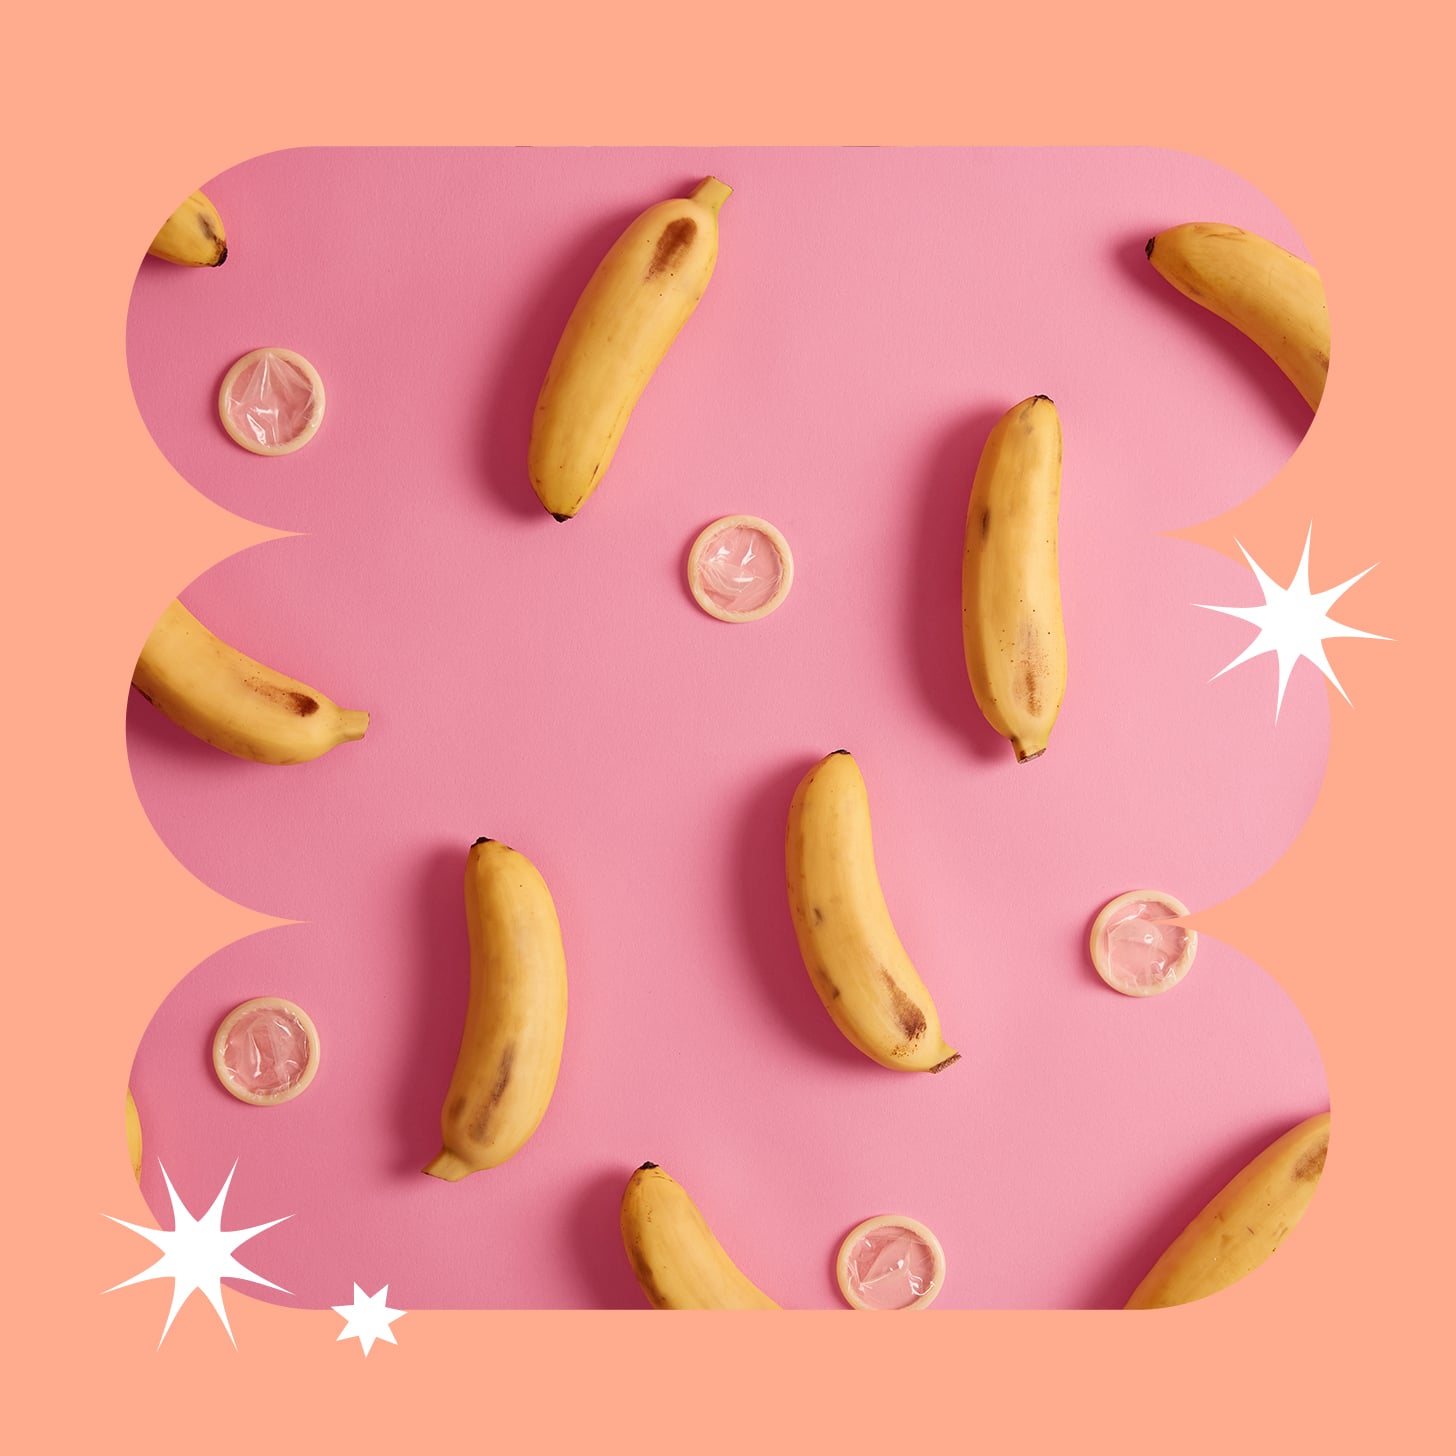 bananas and condoms on a pink background to represent why condoms might break